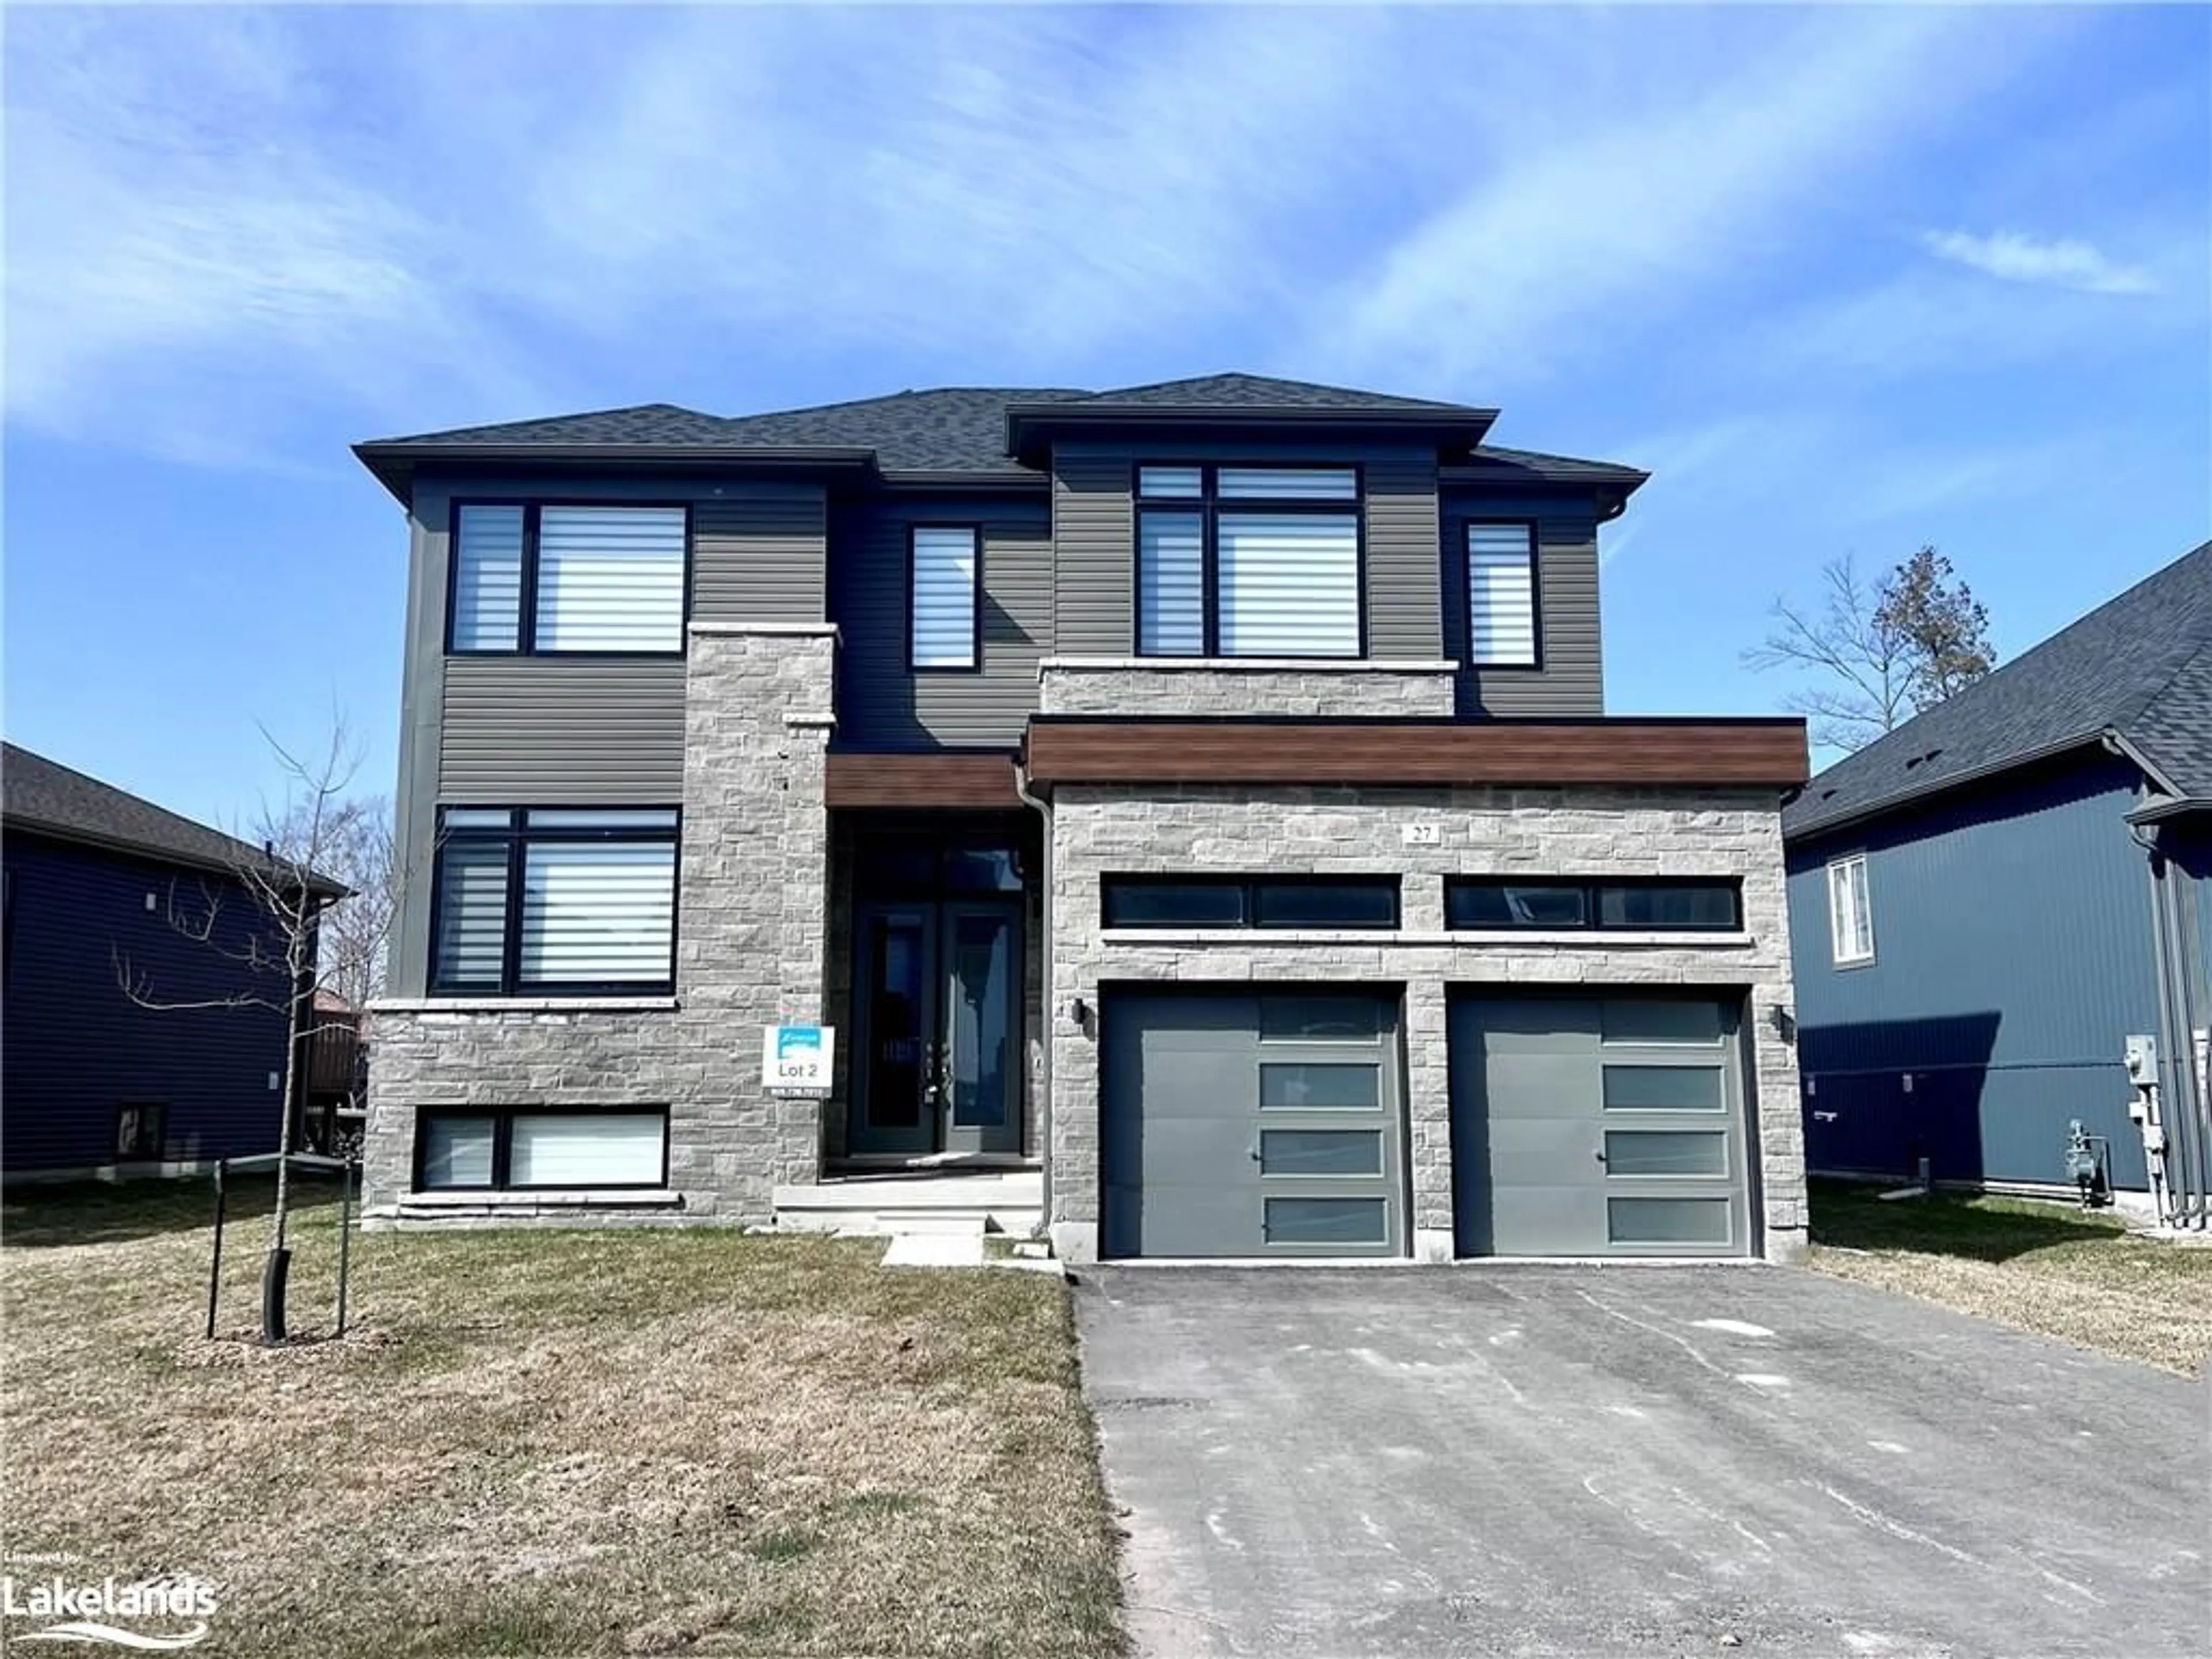 Home with brick exterior material for 27 Beatrice Dr, Wasaga Beach Ontario L9Z 1A5